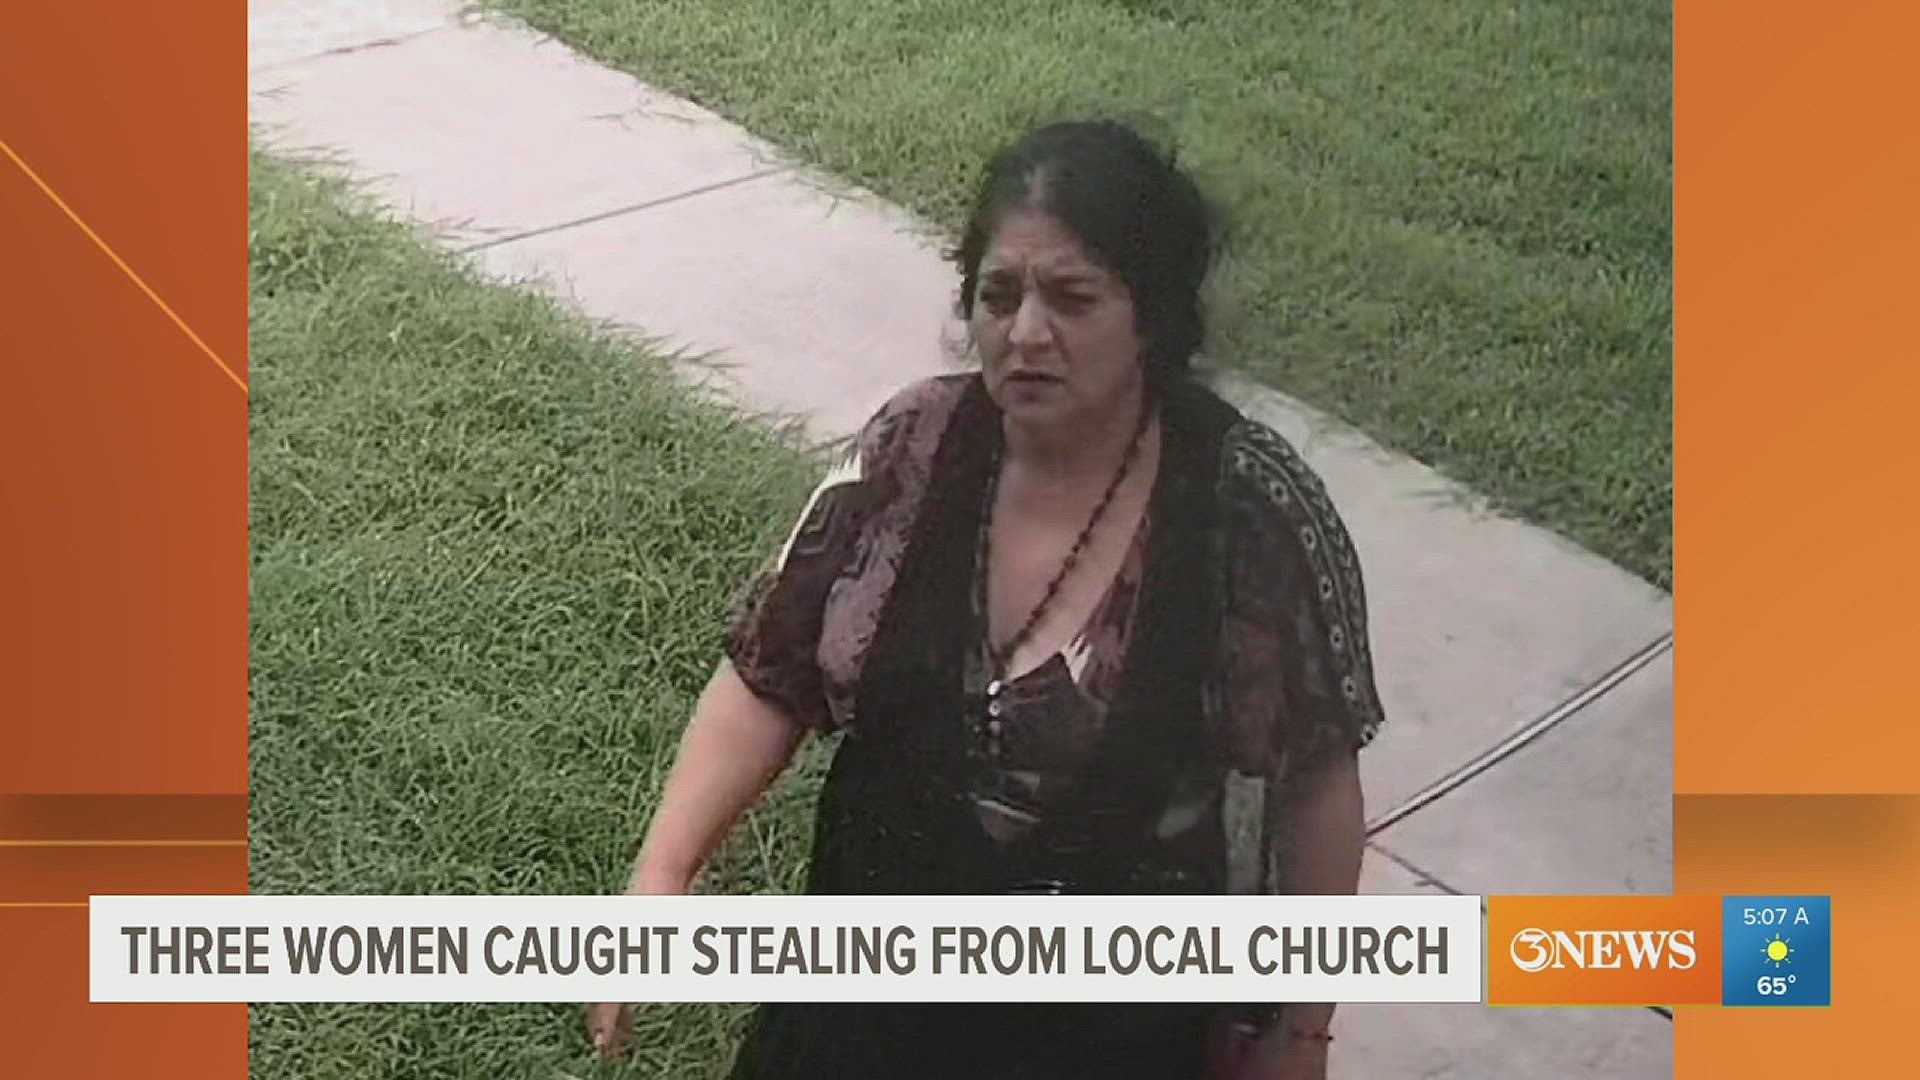 The owner of the church said the women got away with around $6,000 in stolen items.